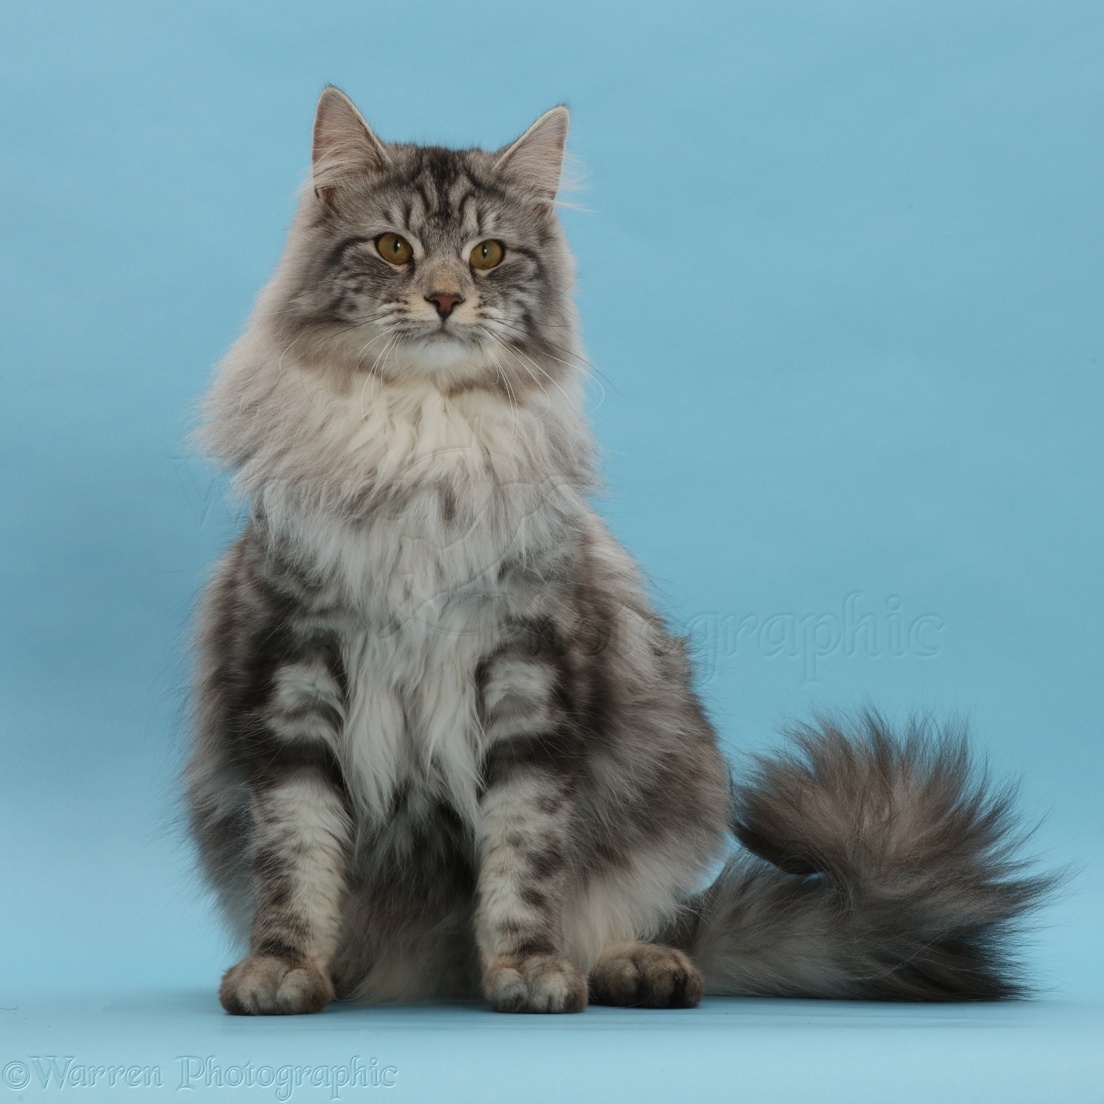 Silver Tabby Cat Sitting On Blue Background Photo Wp45832